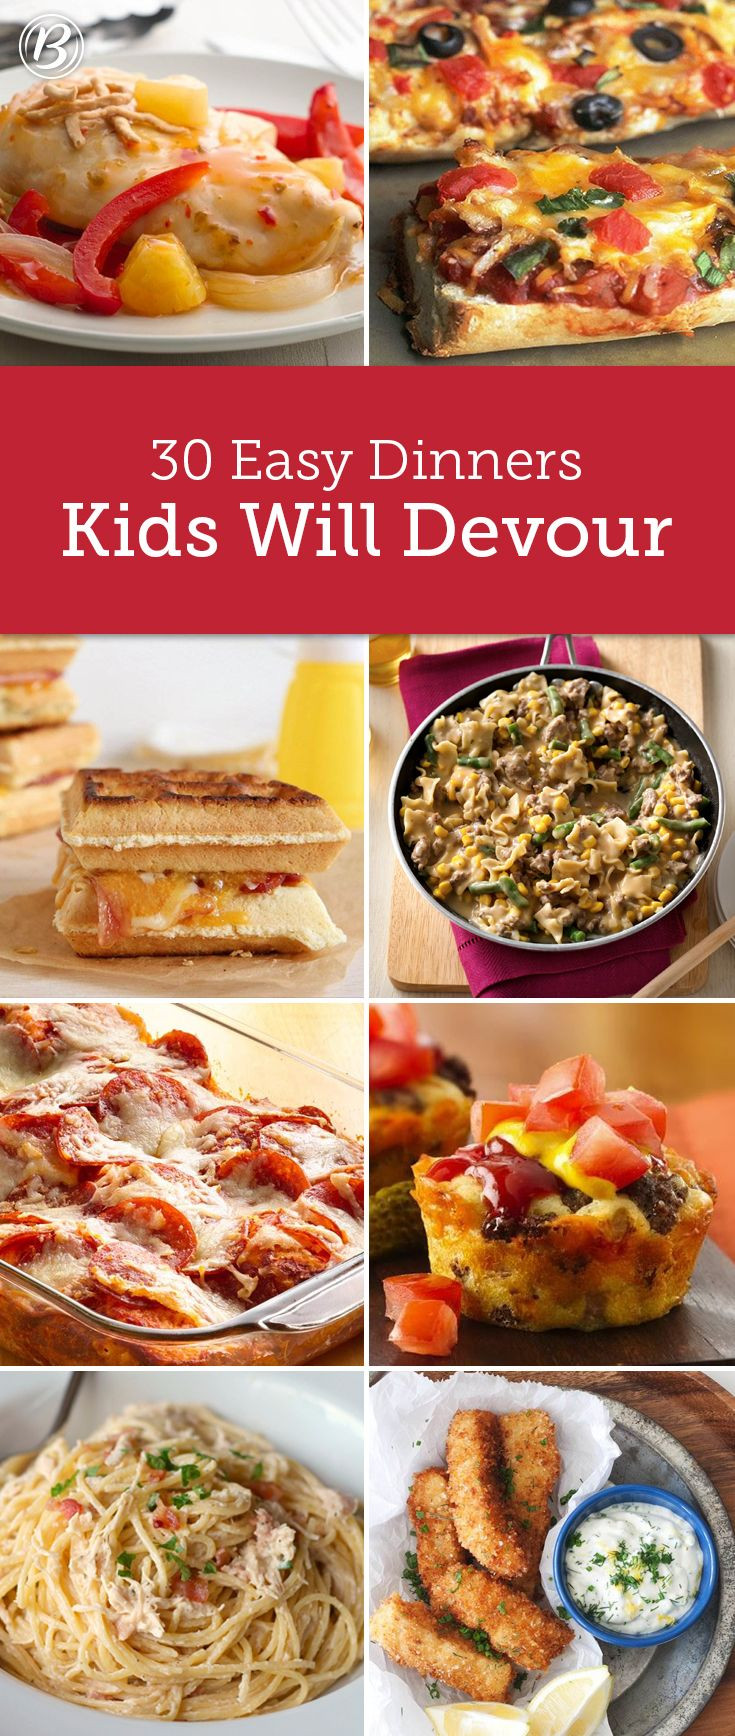 Kid Friendly Meals For Dinner
 Kids’ Most Requested Dinners Family Dinners